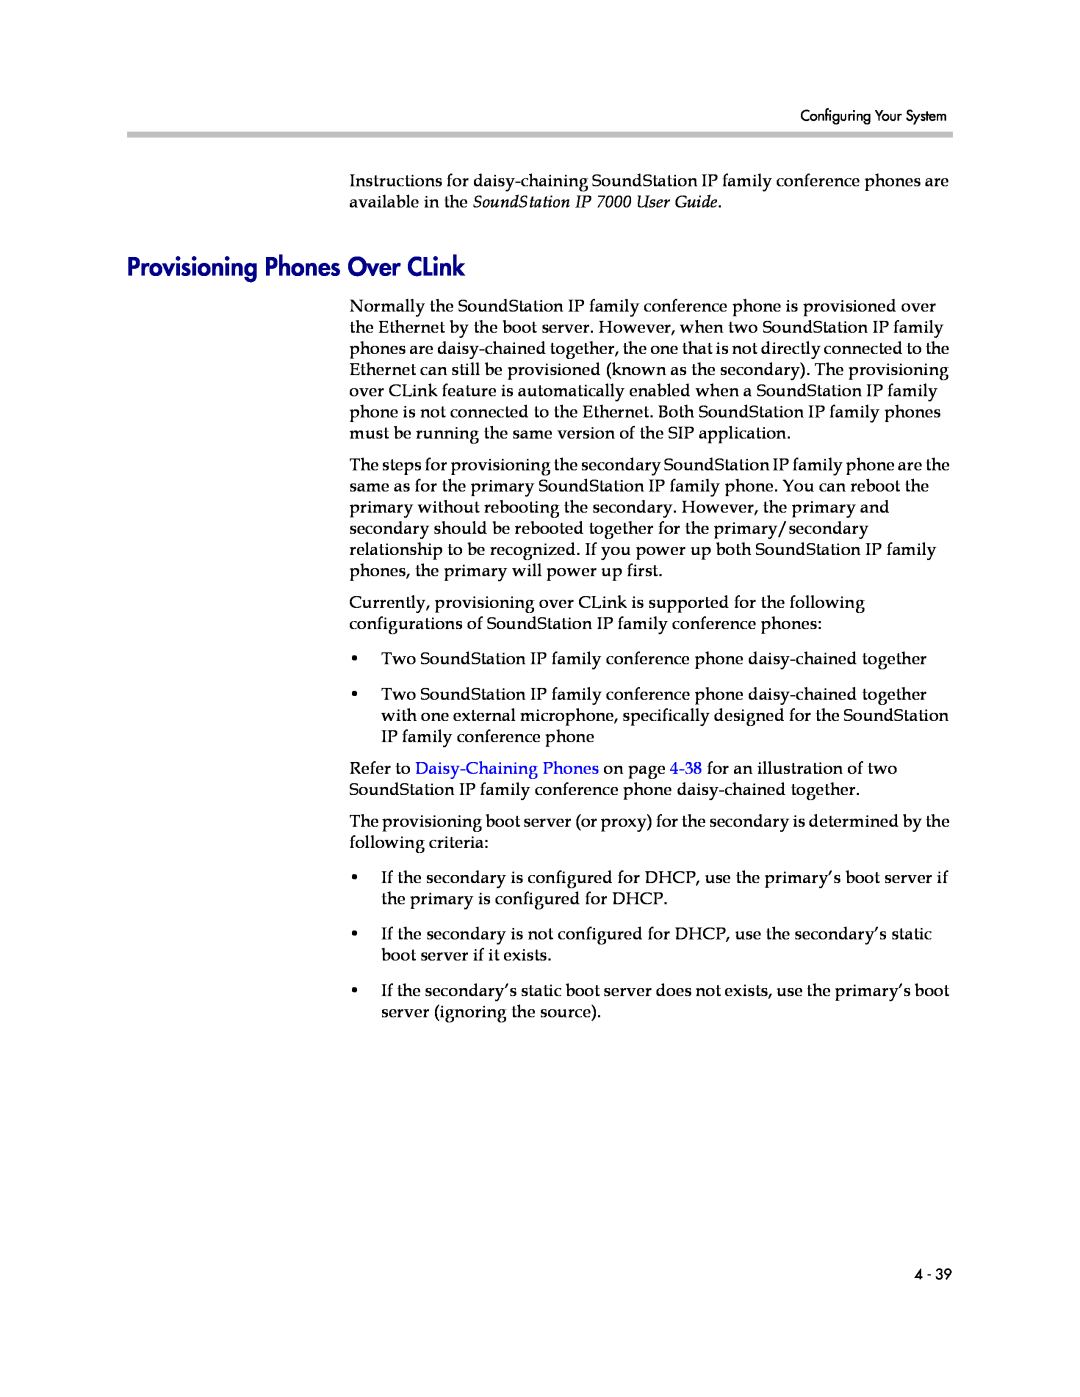 Polycom SIP 3.1 manual Provisioning Phones Over CLink 